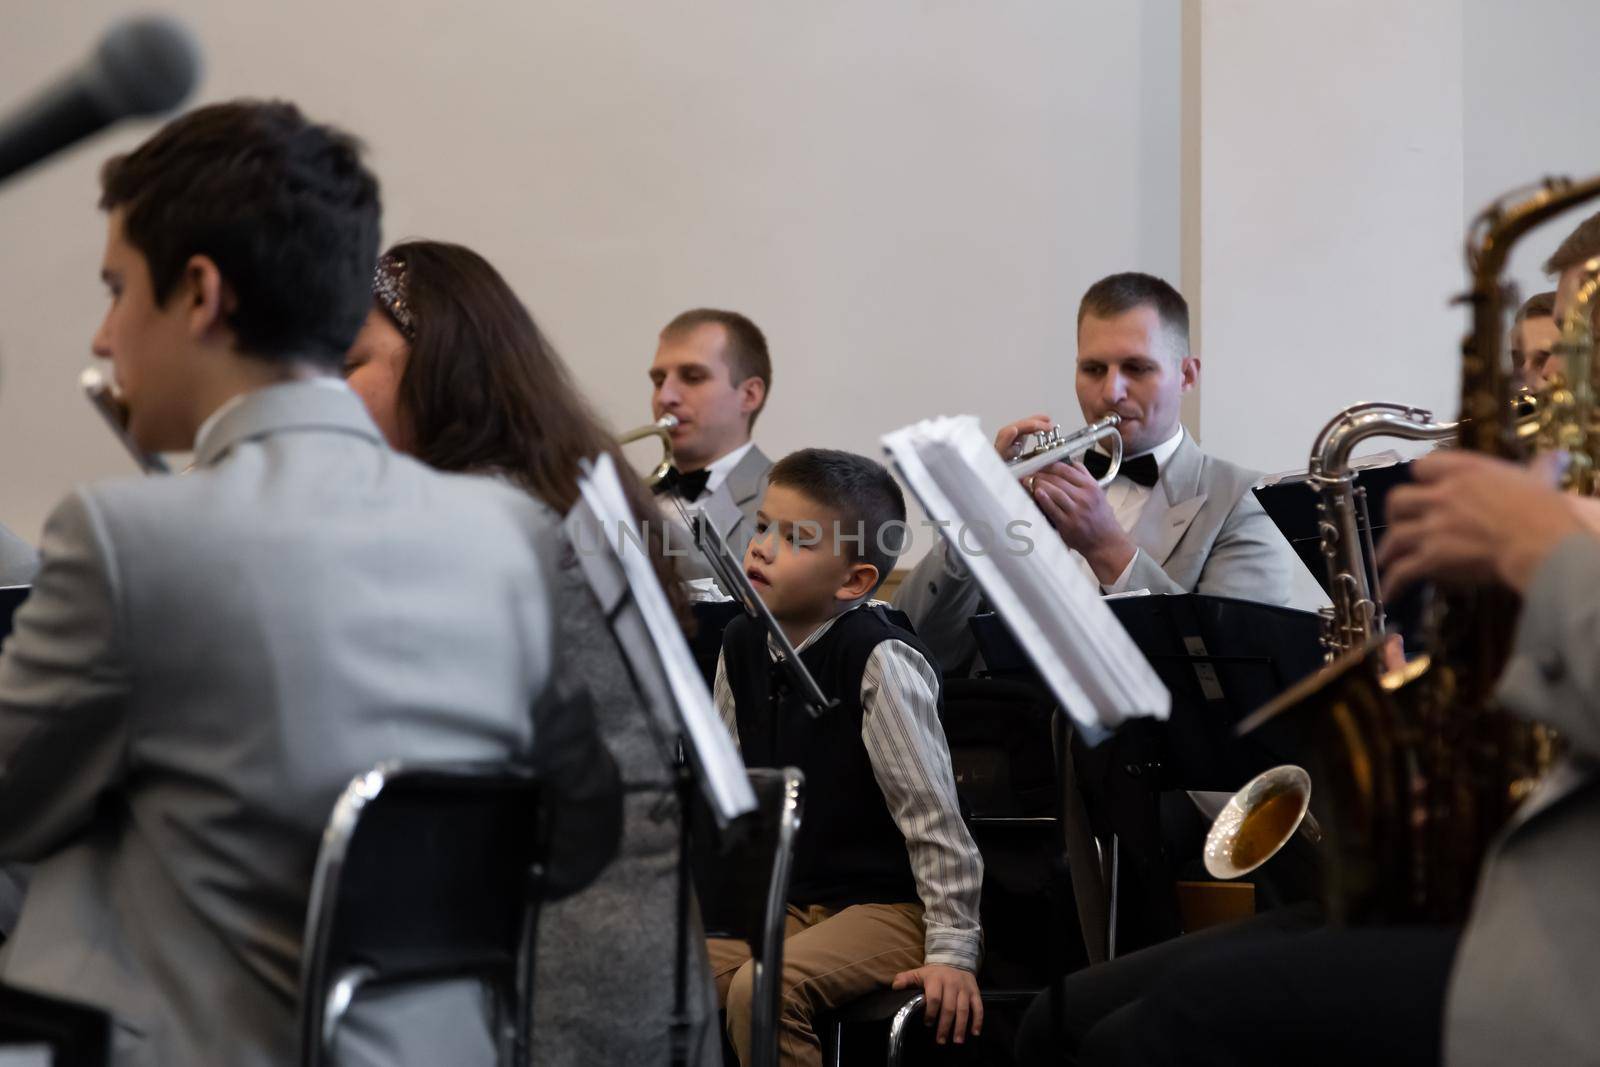 KOROSTEN - NOV, 10, 2019: A little boy sits in an orchestra near the musicians play different musical instruments in gray suits.